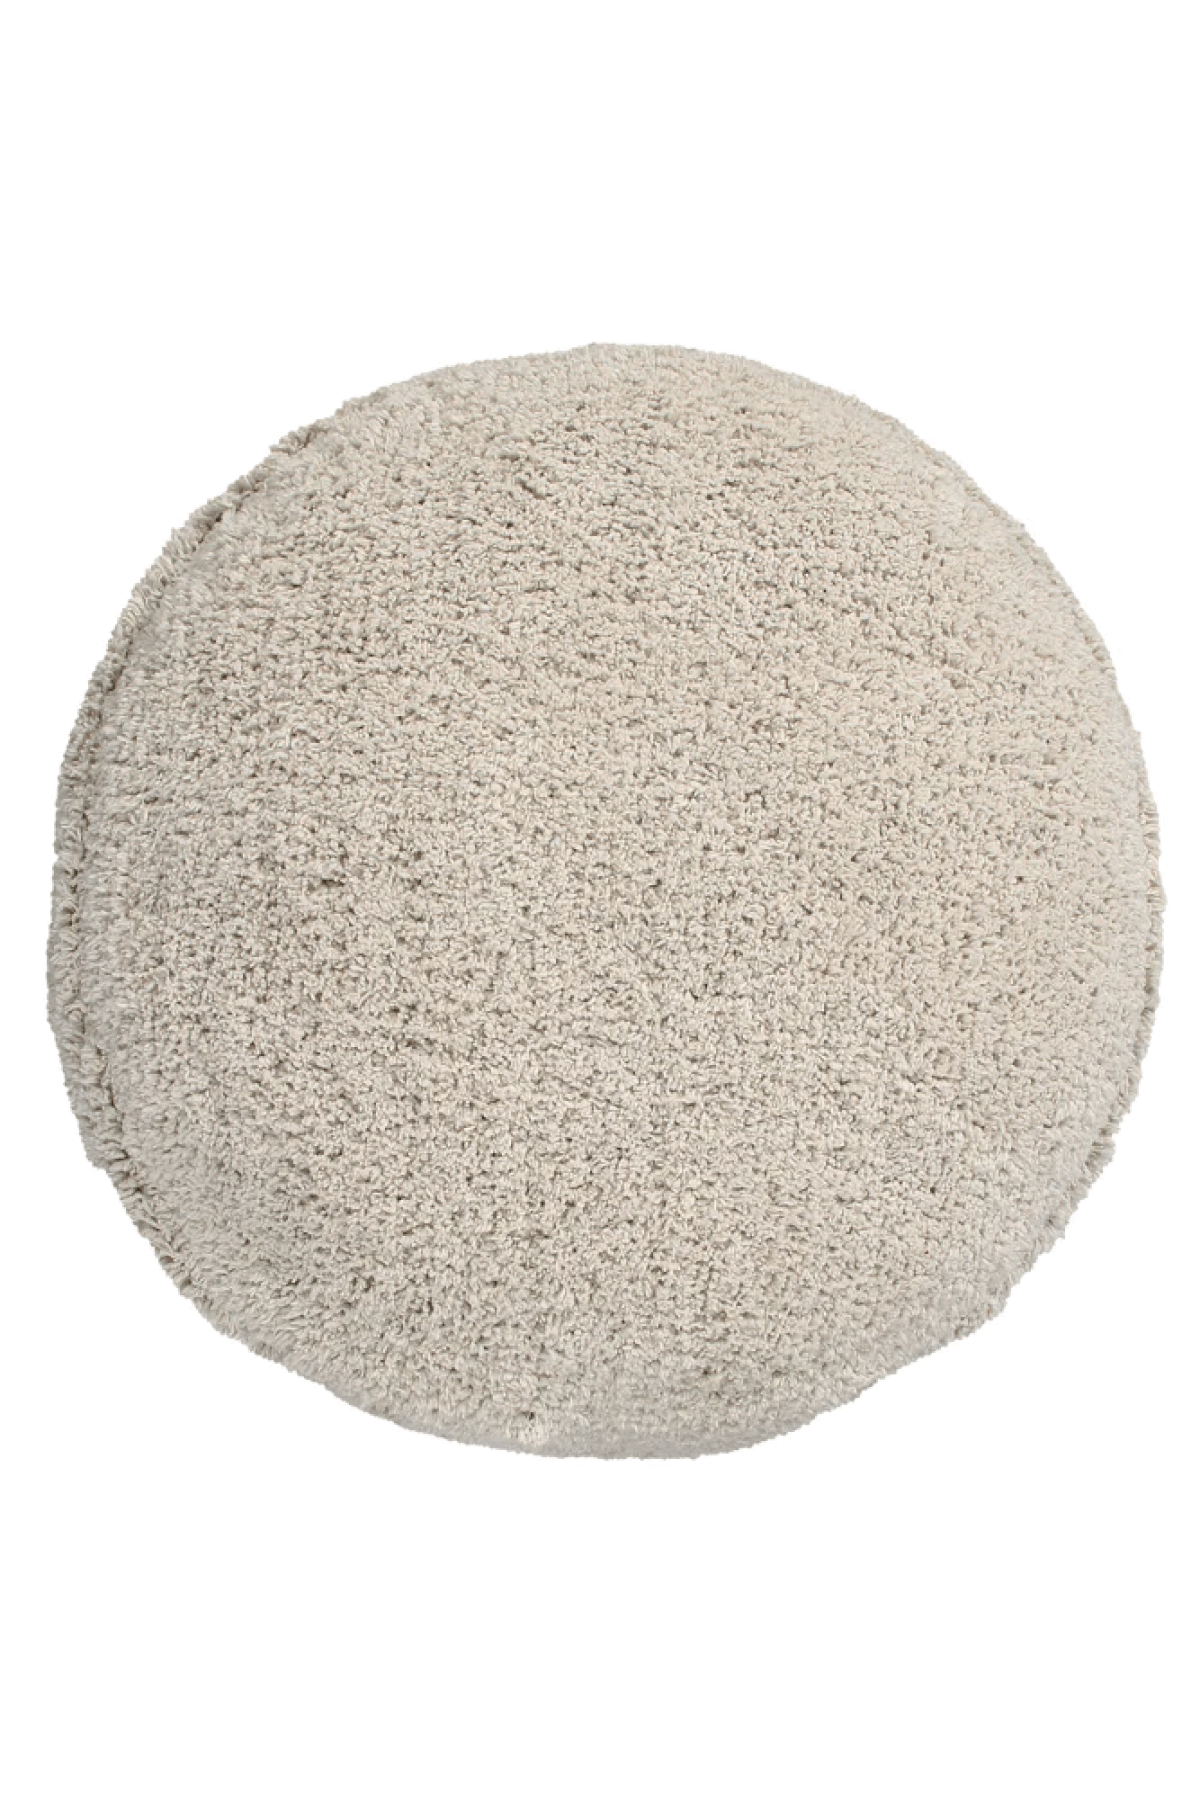 Chill Pouf Floor Cushion, Natural